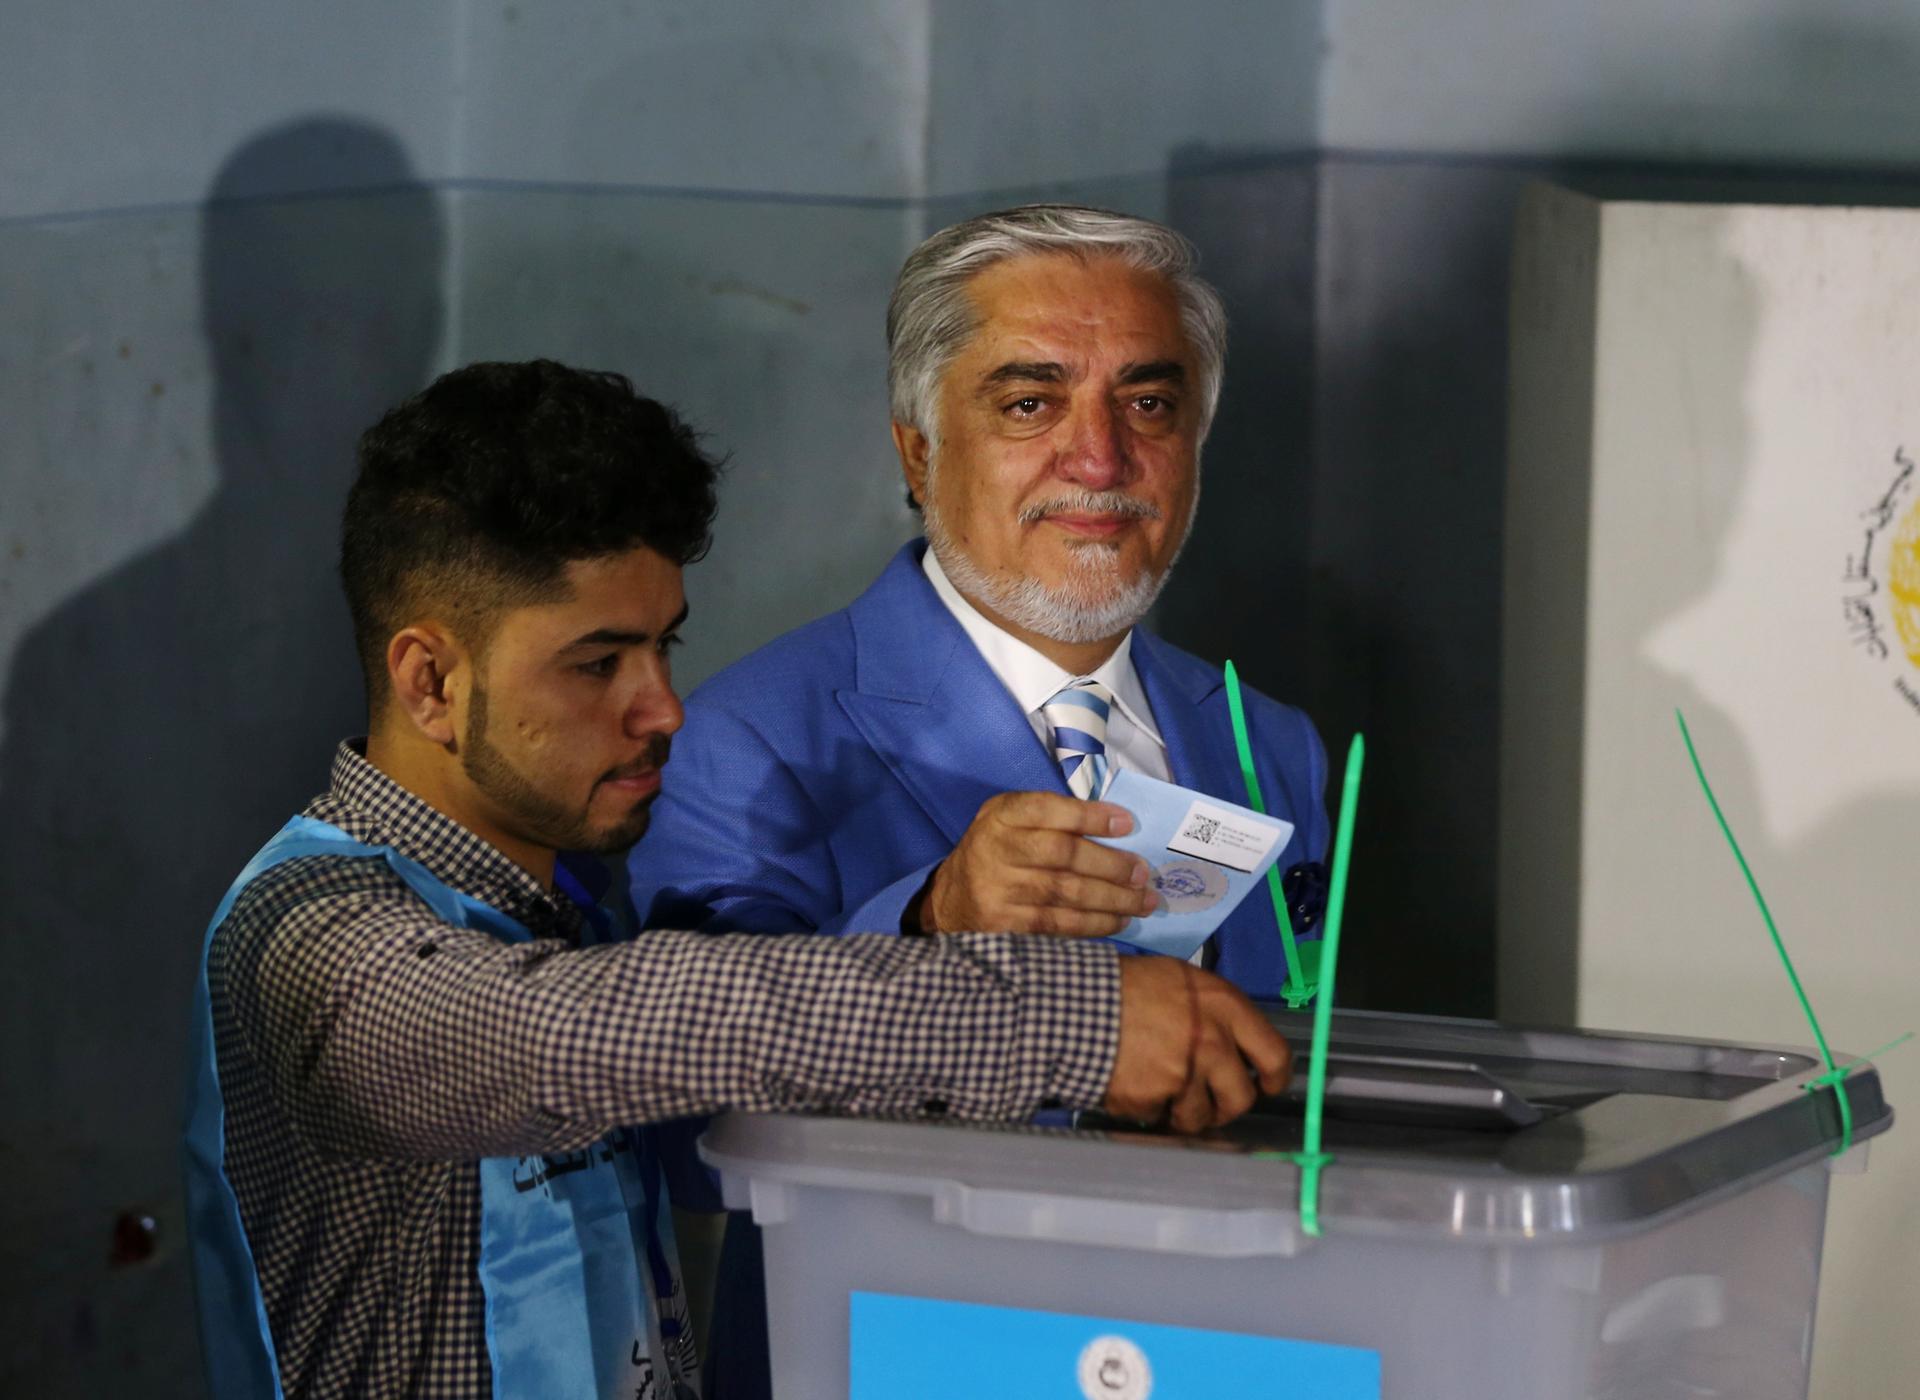 Afghan presidential candidate Abdullah Abdullah casts his vote at a polling station in Kabul, Afghanistan.